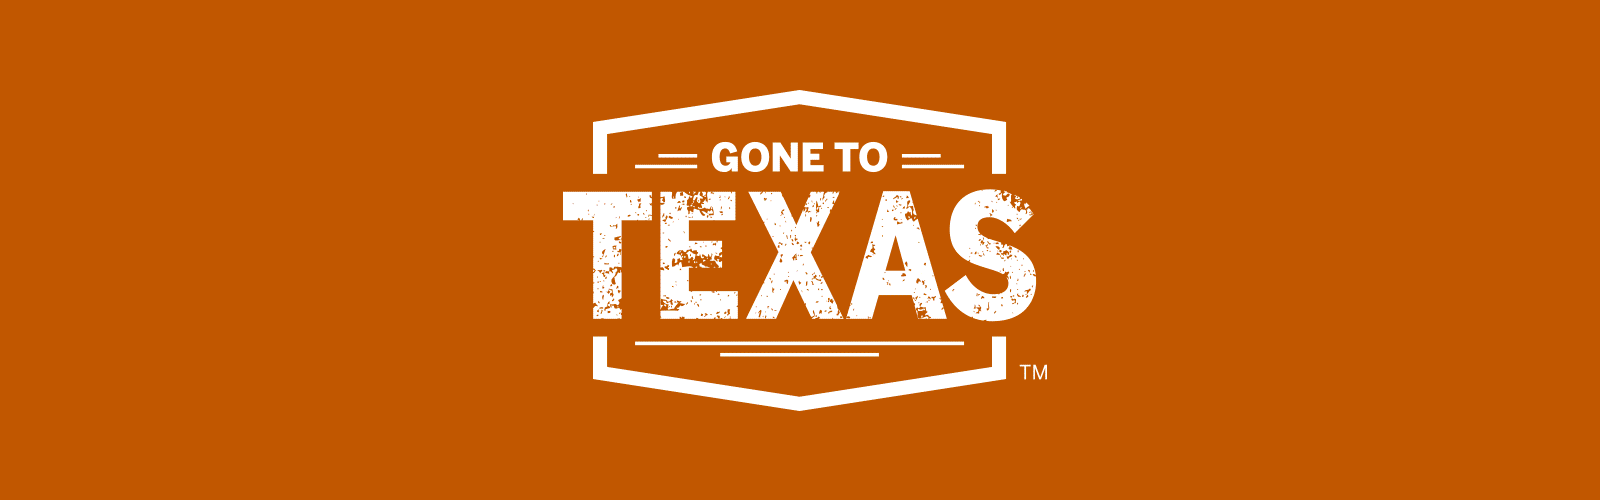 gone to texas 2017